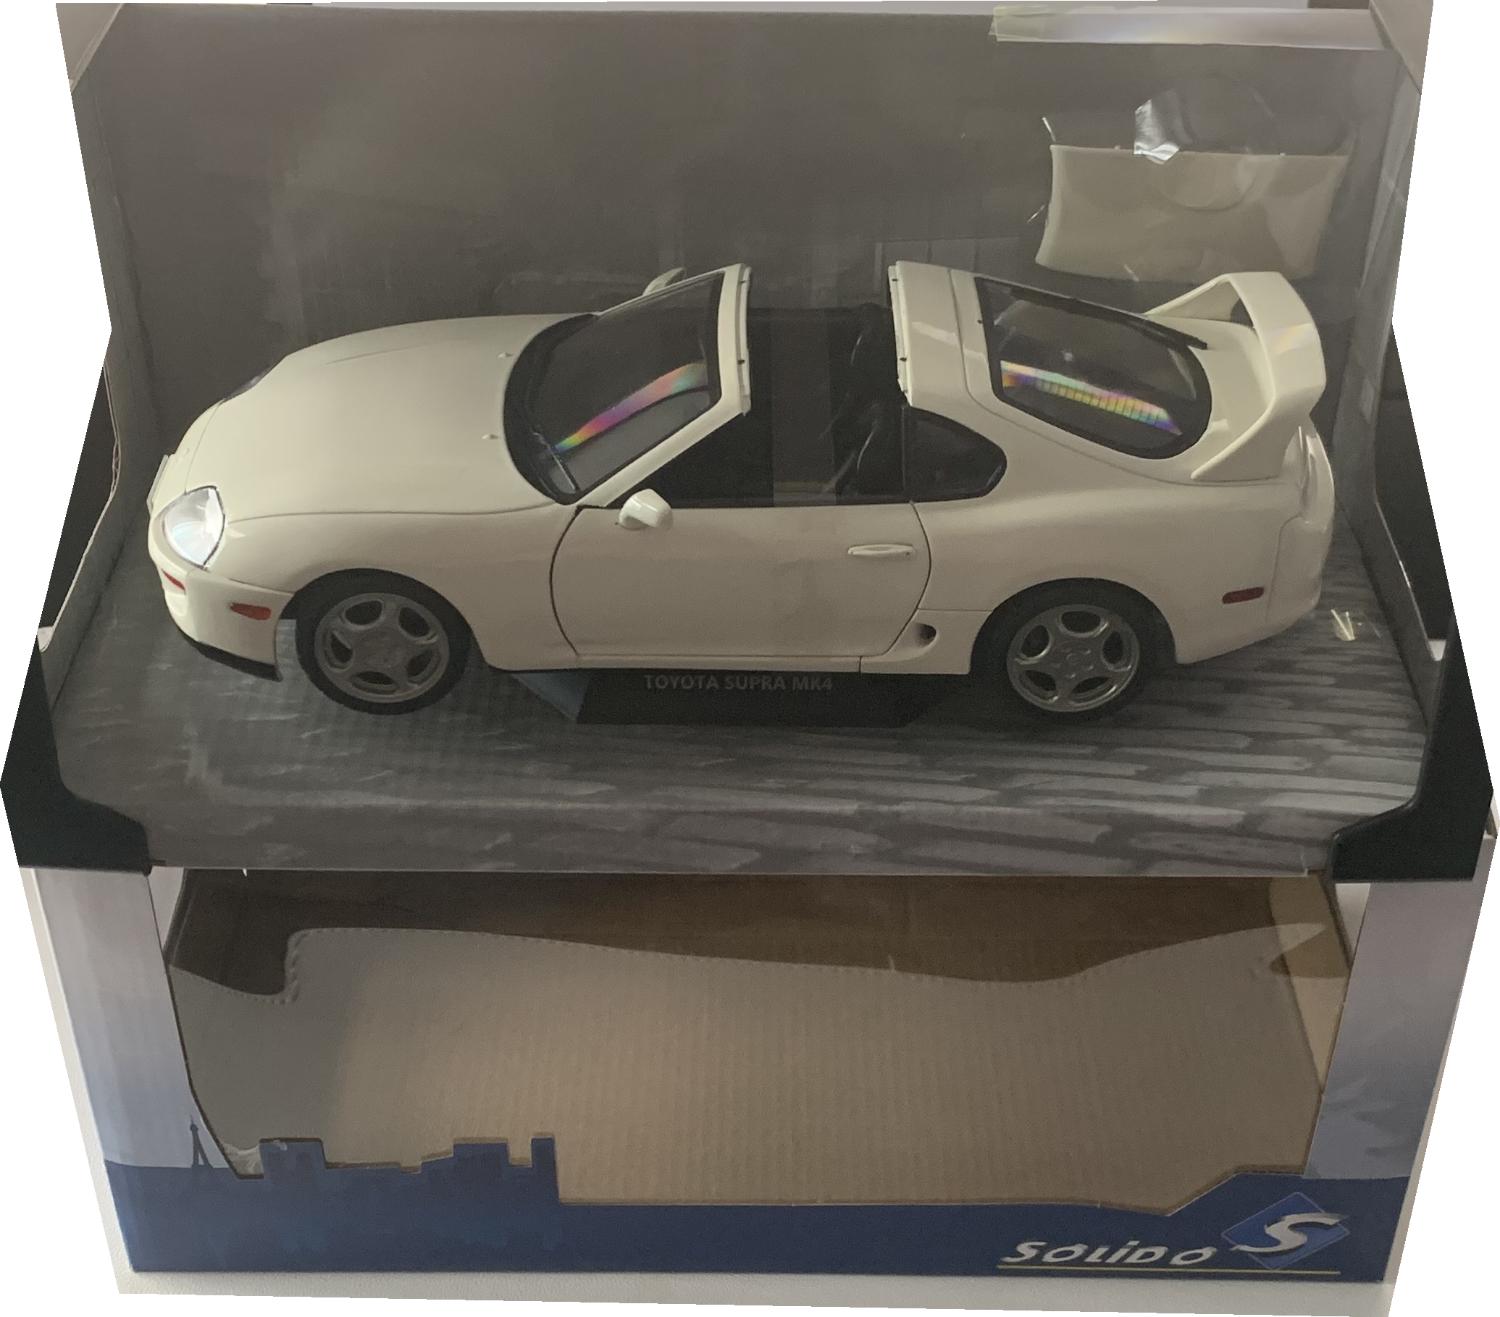 An excellent scale model of the Toyota Supra Targa with high level of detail throughout, all authentically recreated. Model is presented in a window display box.  The car is approx. 24 cm long and the presentation box is 31 cm long